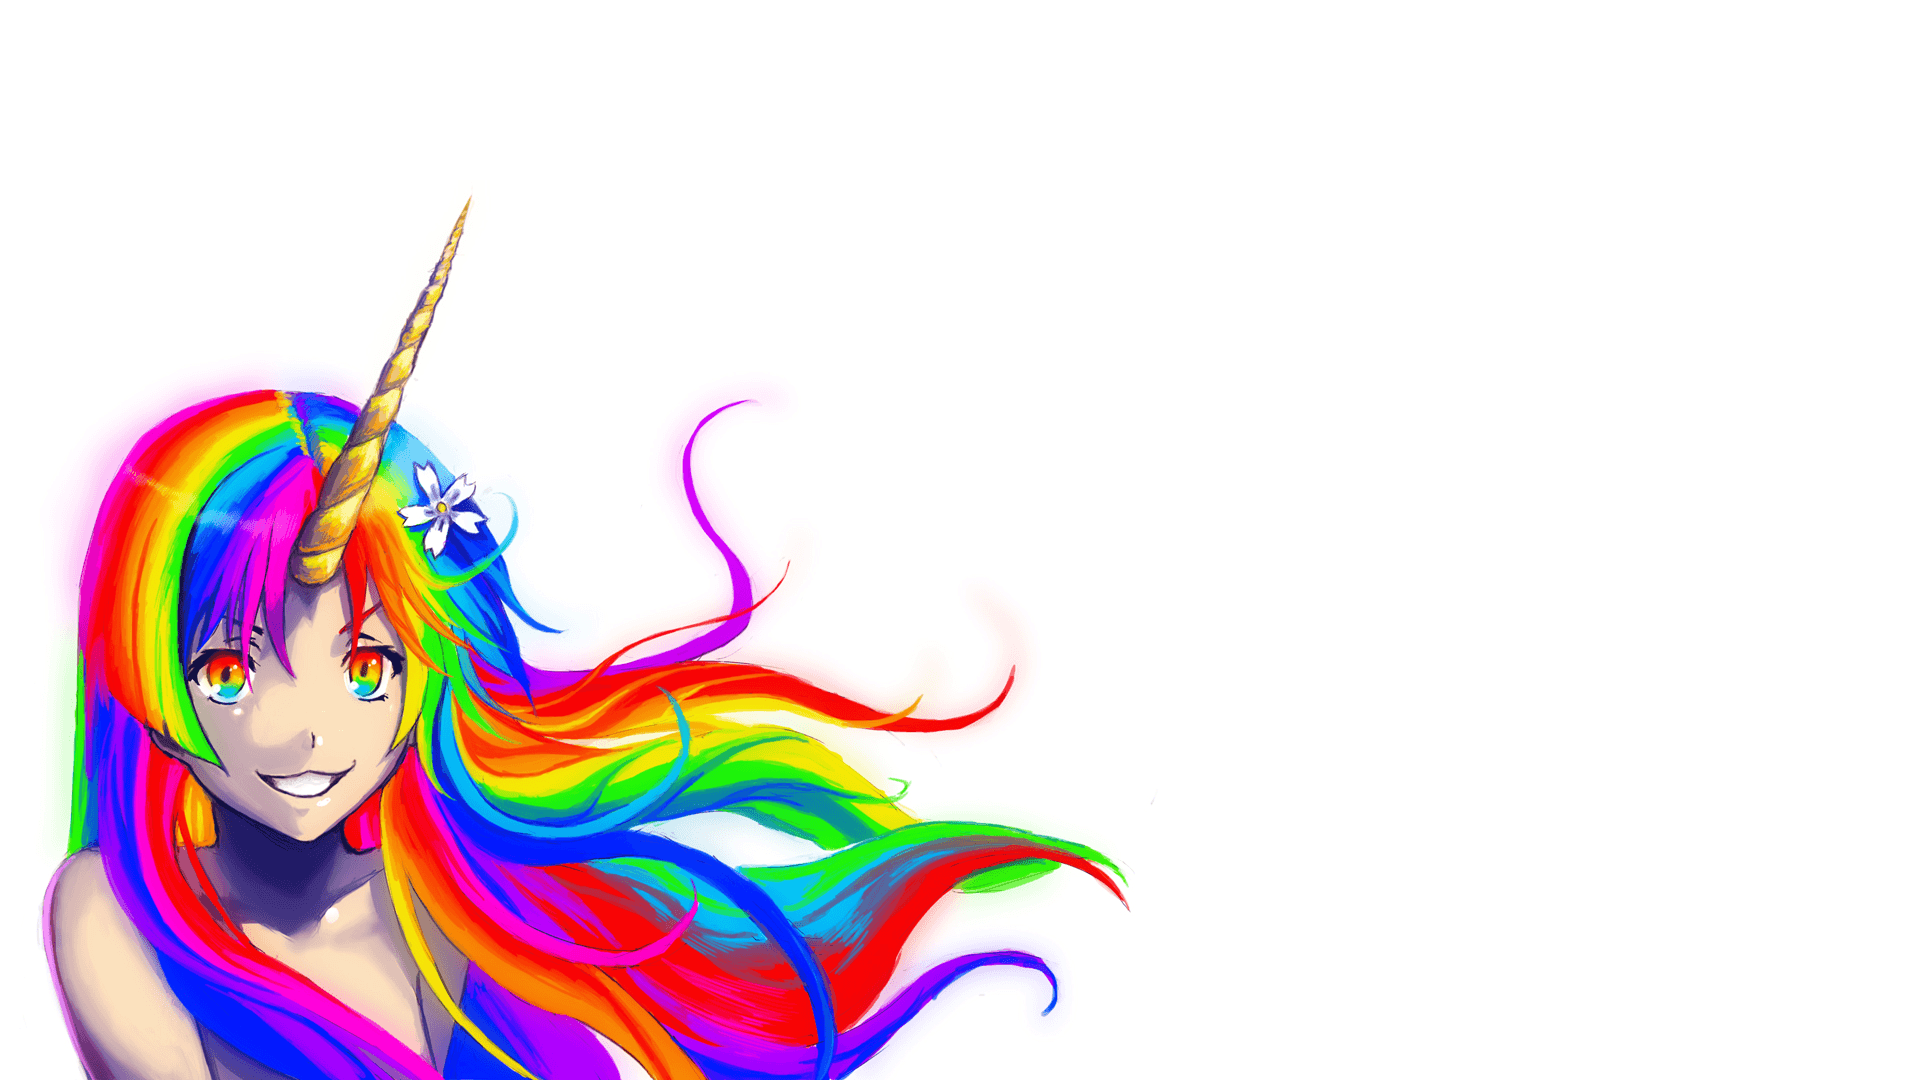 The girl and the unicorn Wallpaper